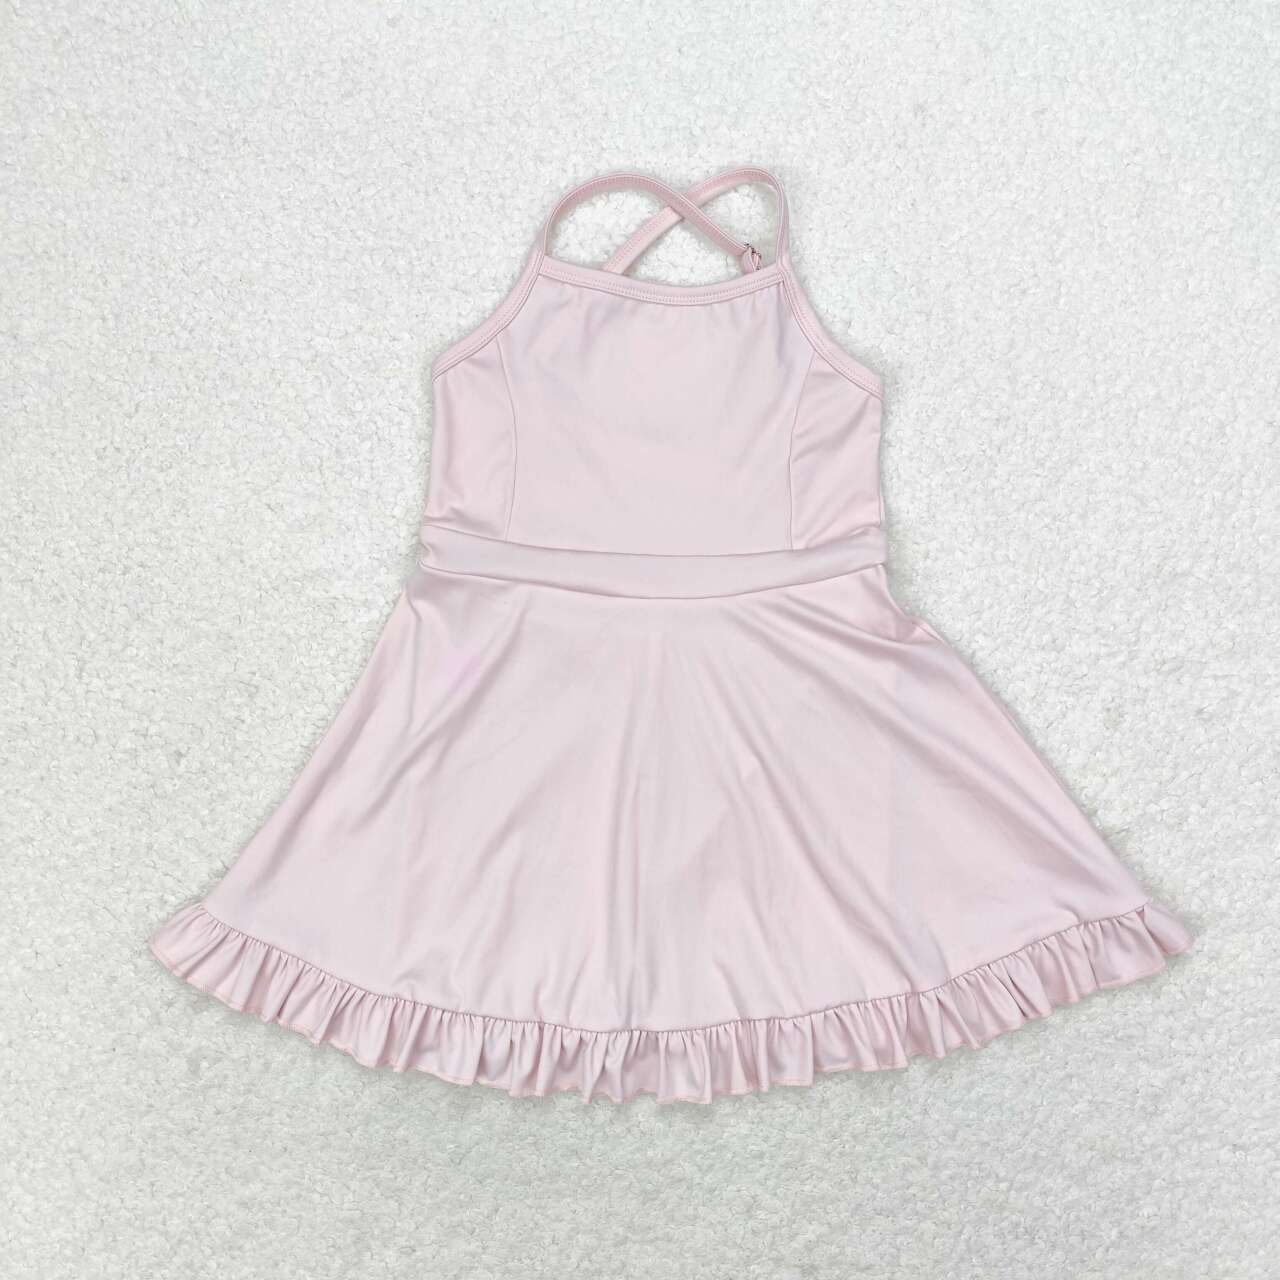 RTS no moq S0443 Kids Girls summer clothes suspenders top with sportswear skirt swimsuit